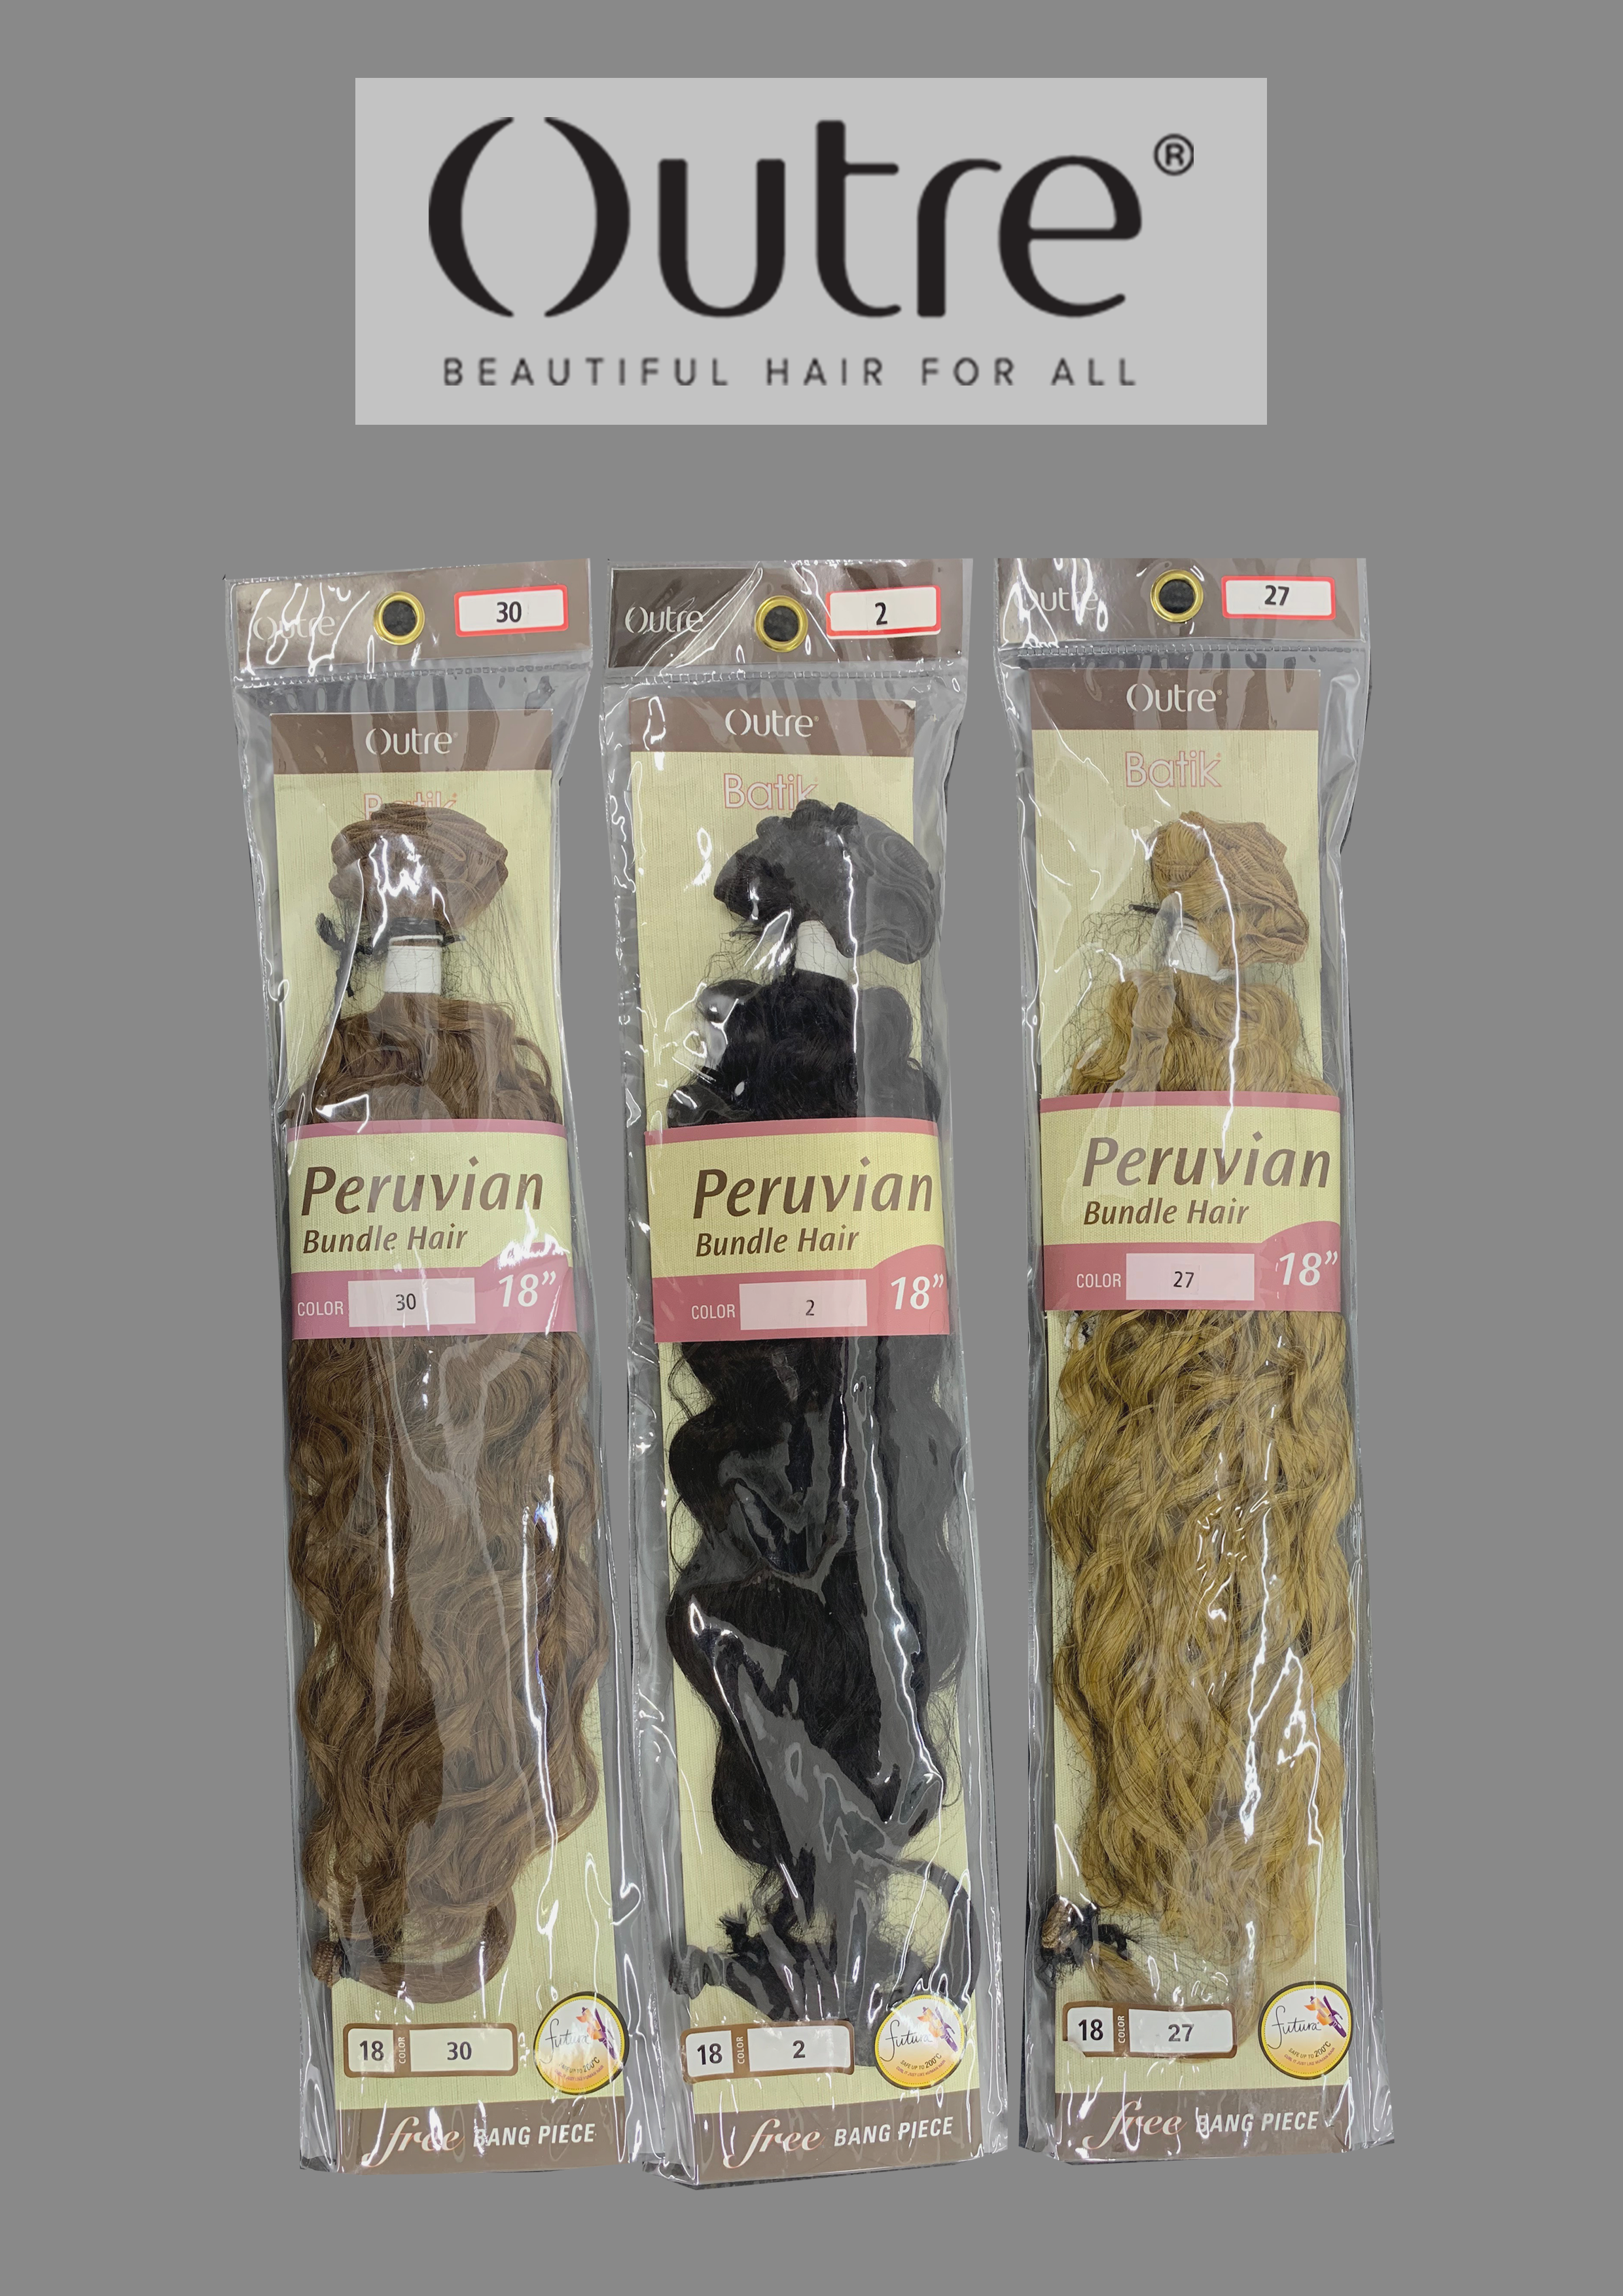 Peruvian Bundle Hair Packs by Outre